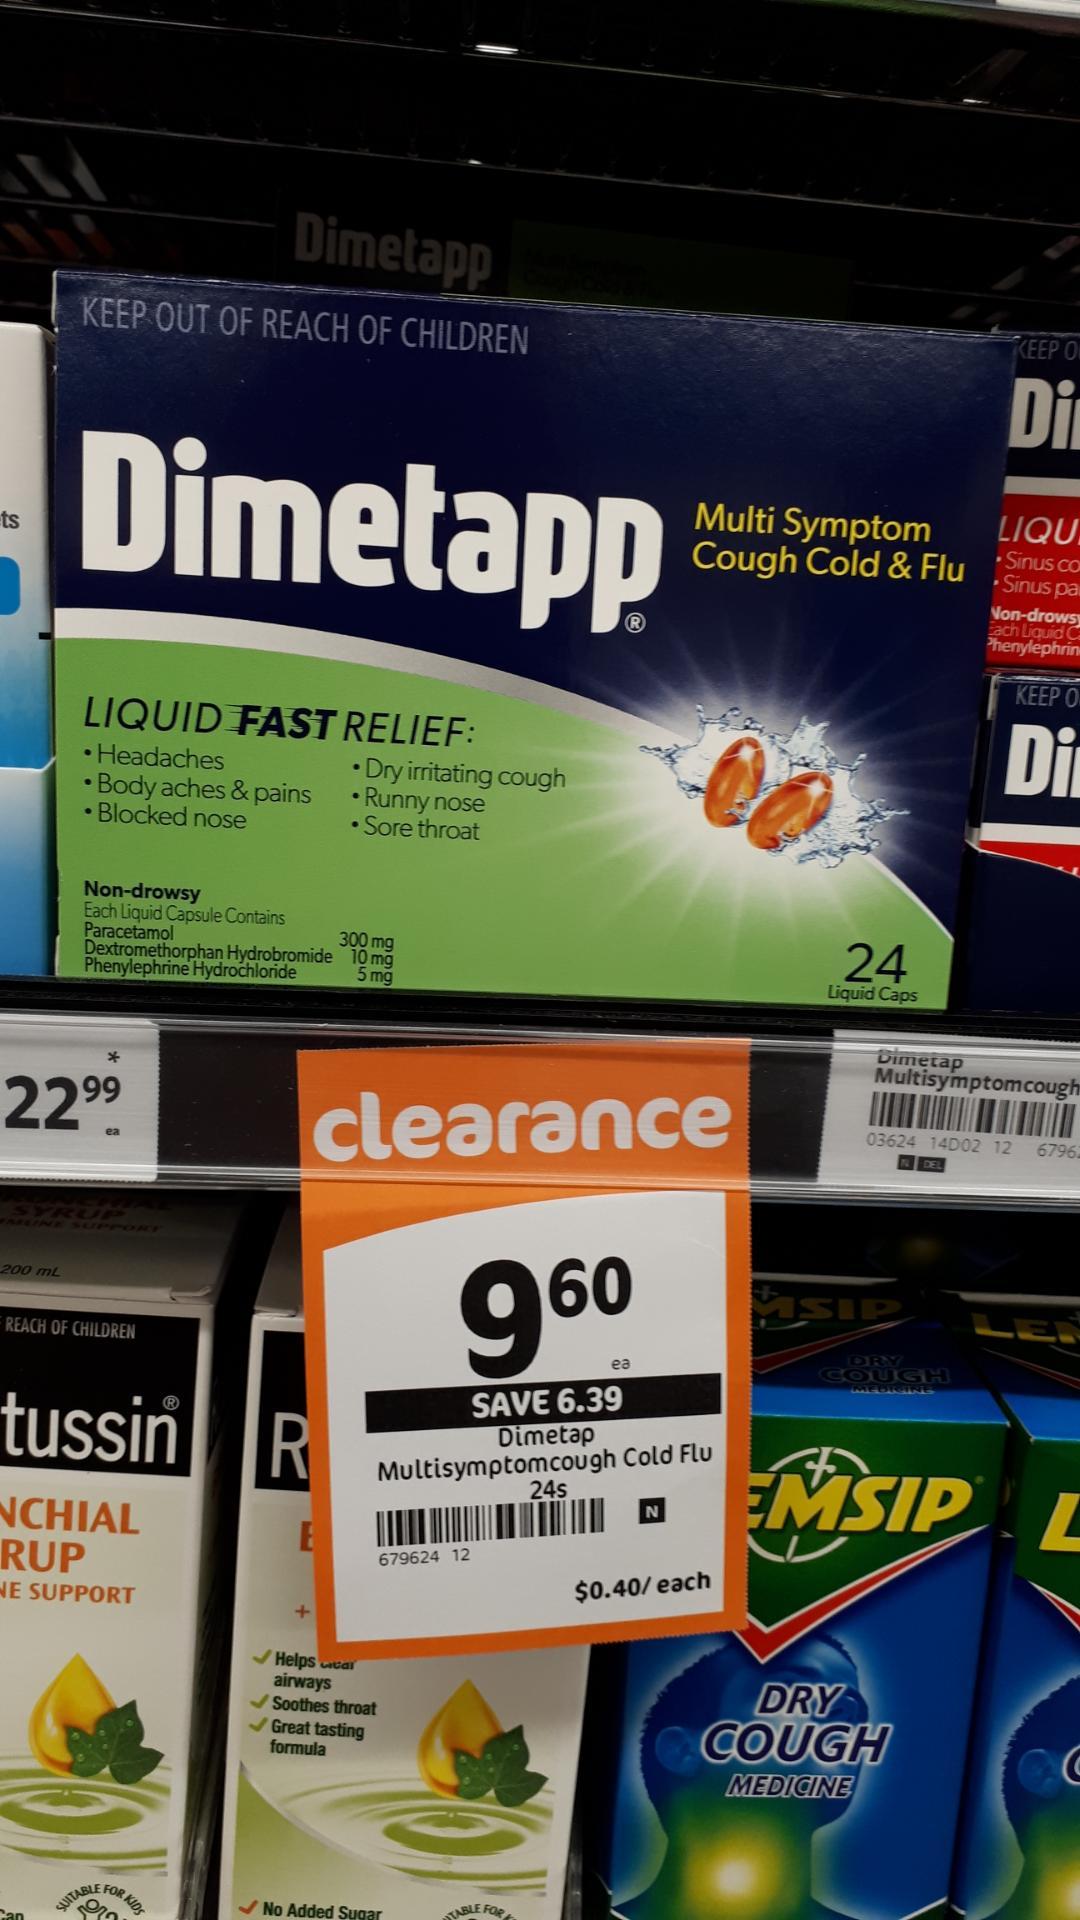 Dimetapp Logo - News of cough meds banned from supermarkets slow to filter through